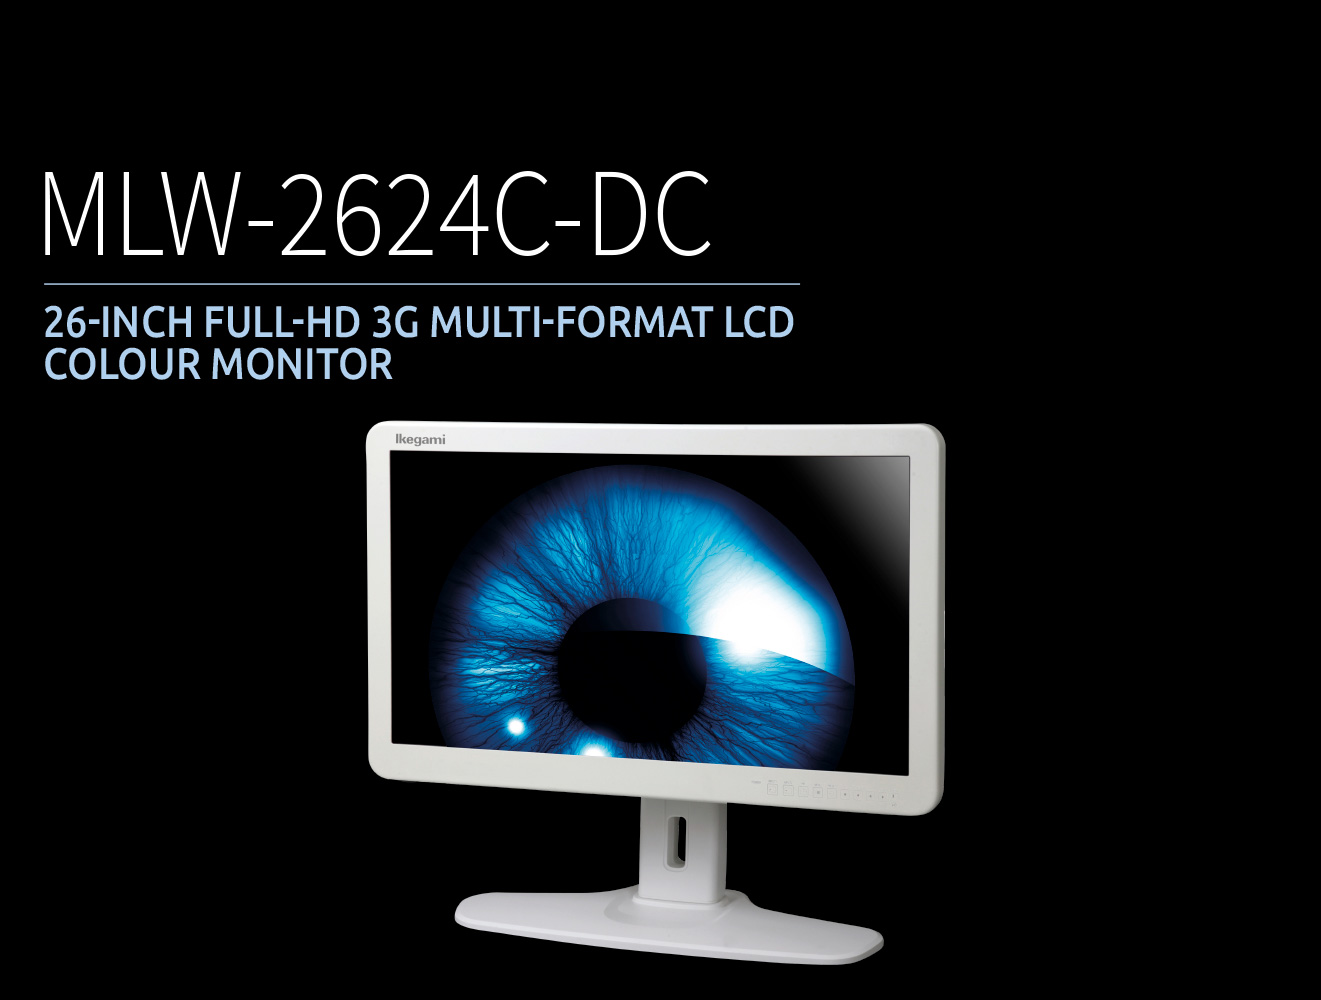 MLW-2624C-DC